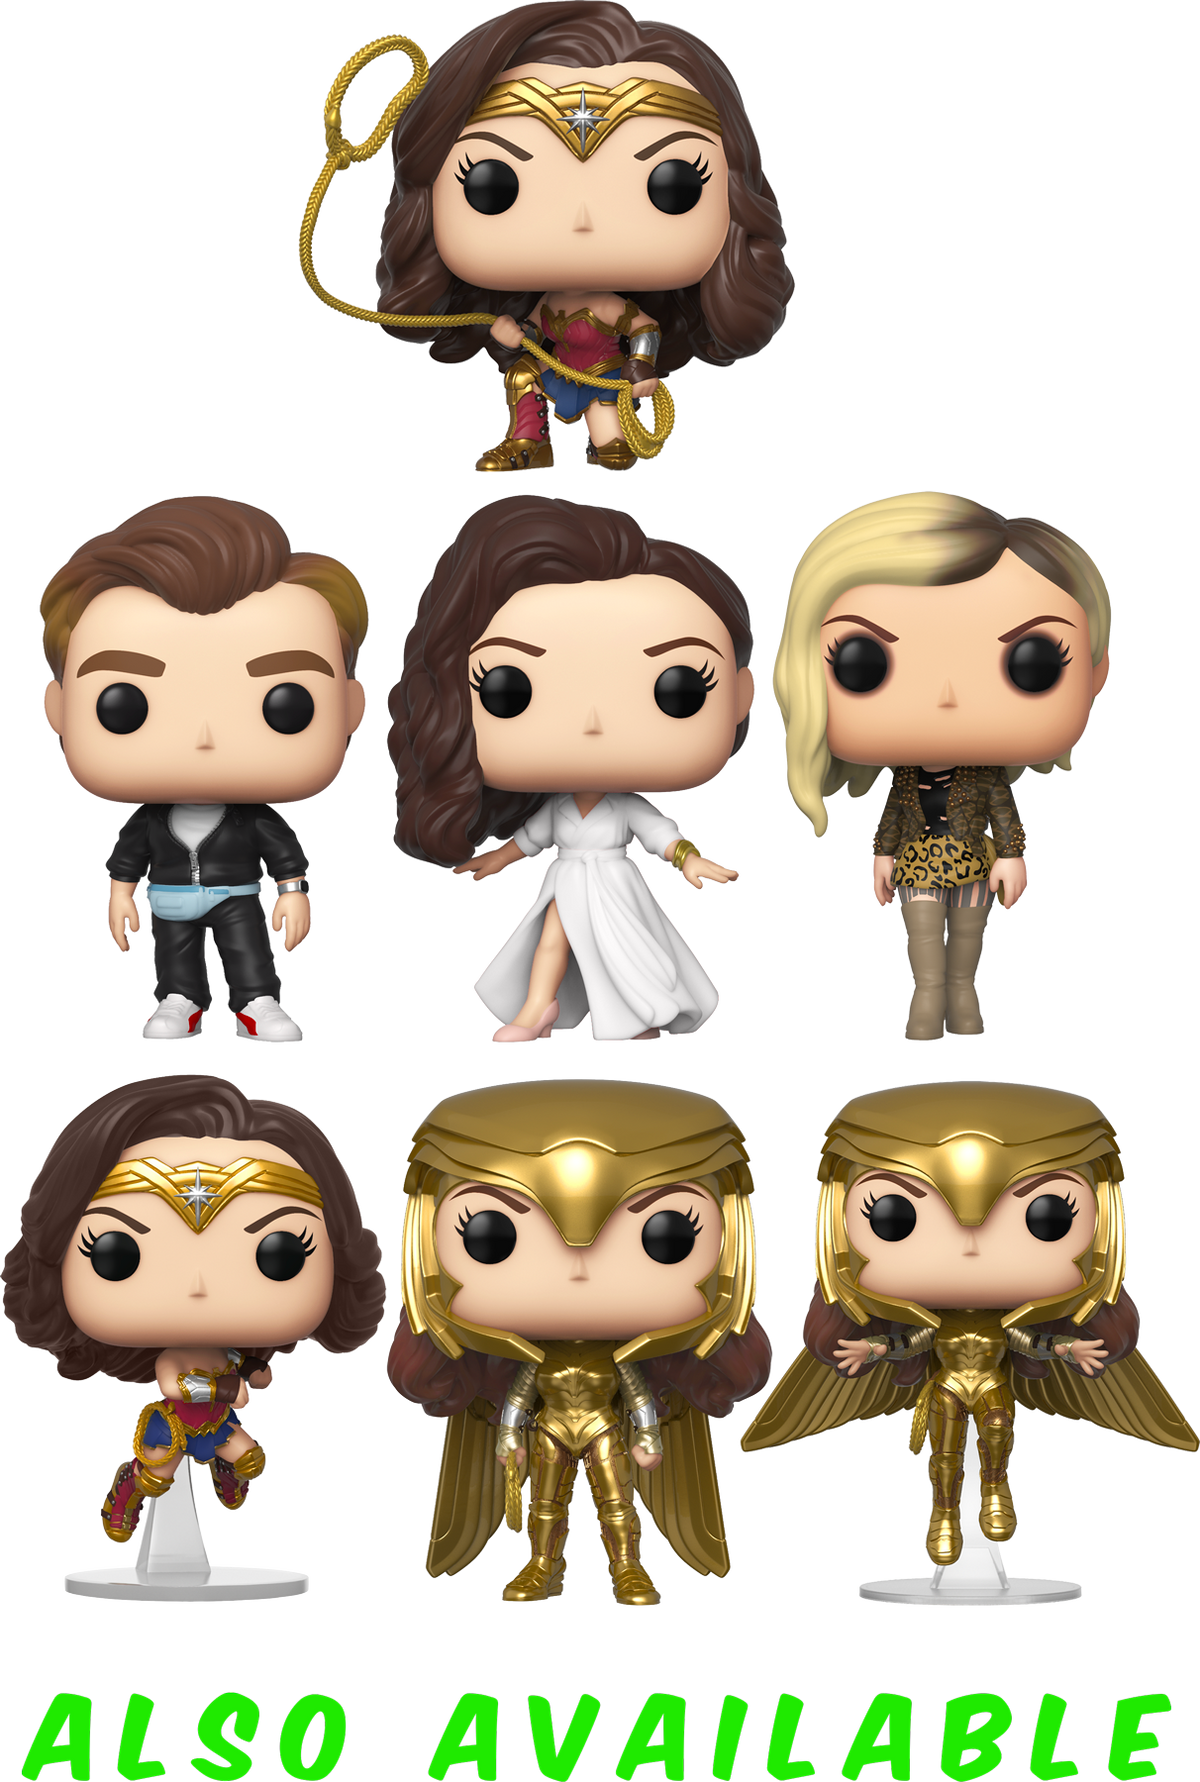 Funko Pop! Wonder Woman 1984 - Wonder Woman Gold Armour Power Pose #323 - The Amazing Collectables